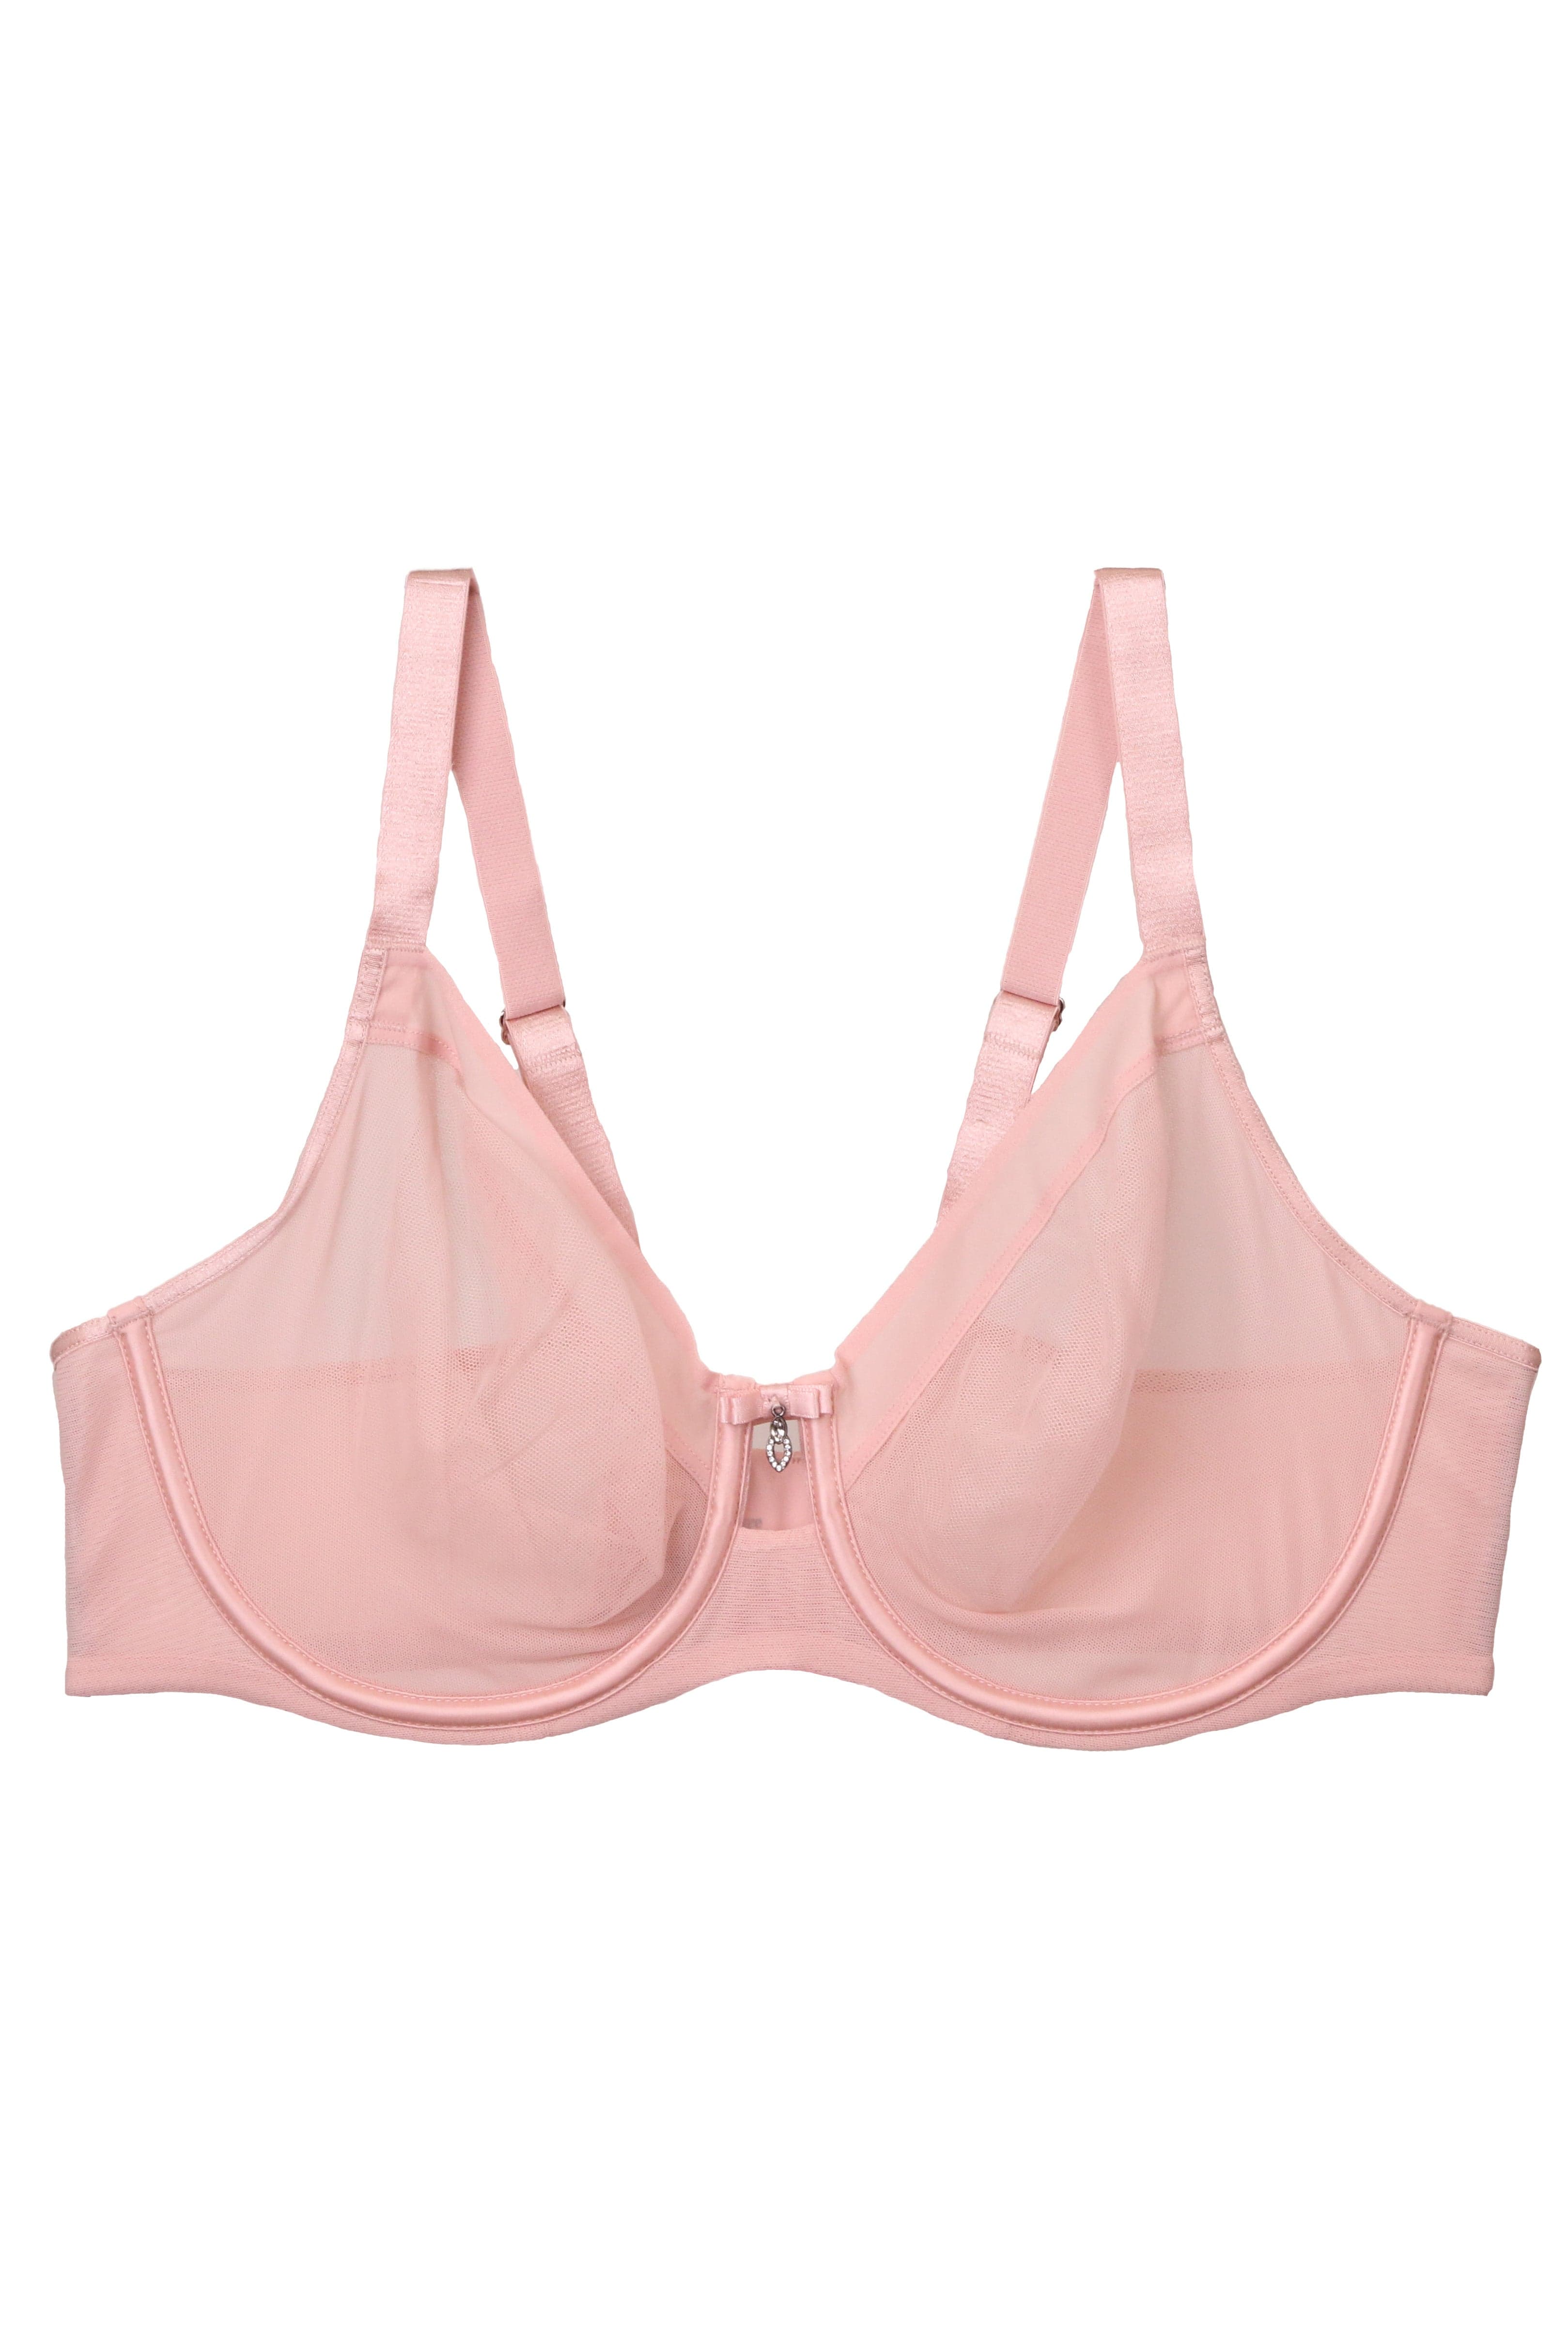 Sheer Mesh Unlined Underwire Bra - Blushing Rose - Chérie Amour